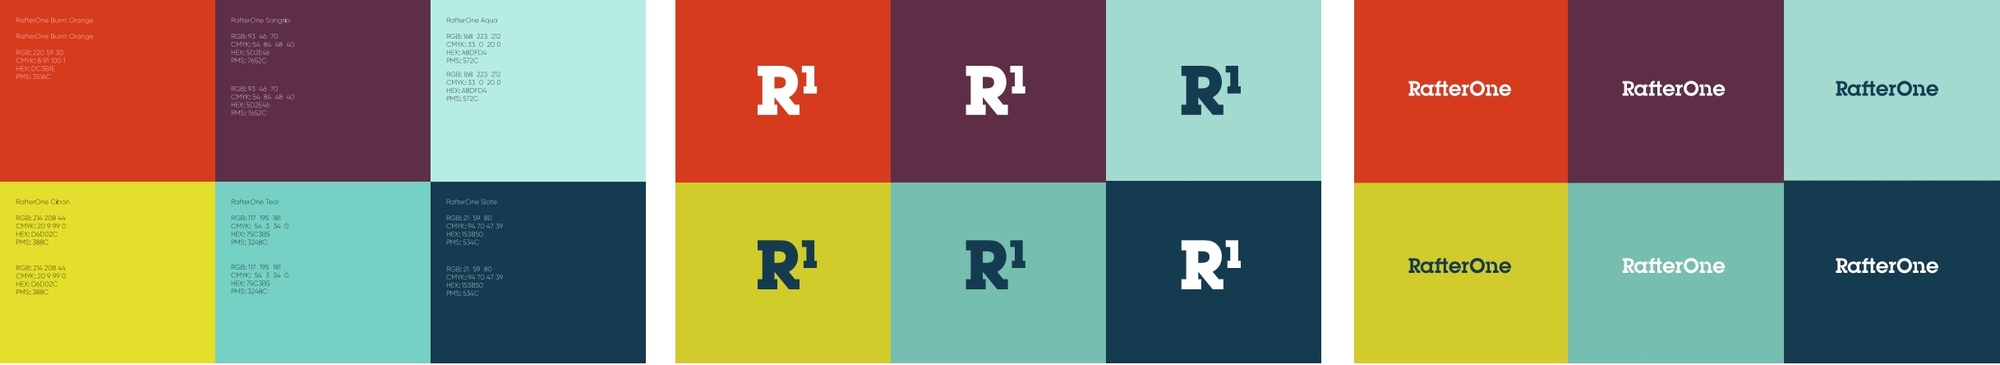 blocks of color with R1 inside.